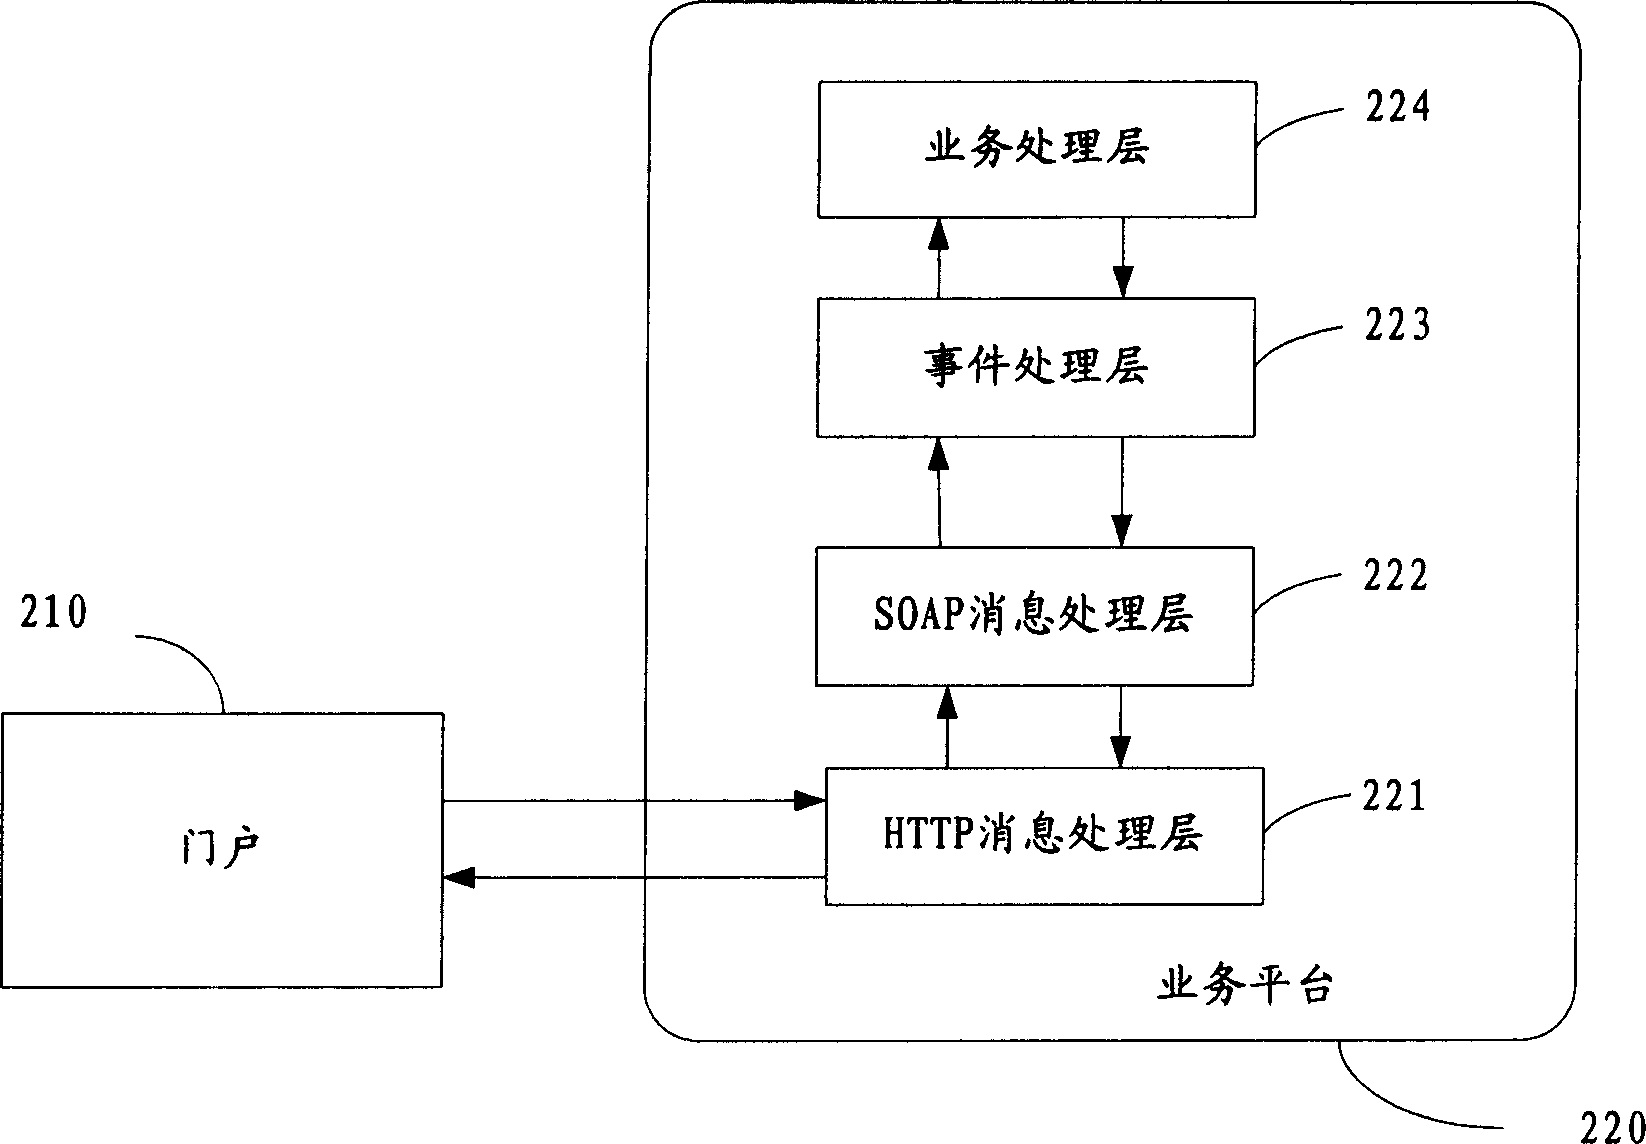 Method and system for realizing separation of service platform and gate